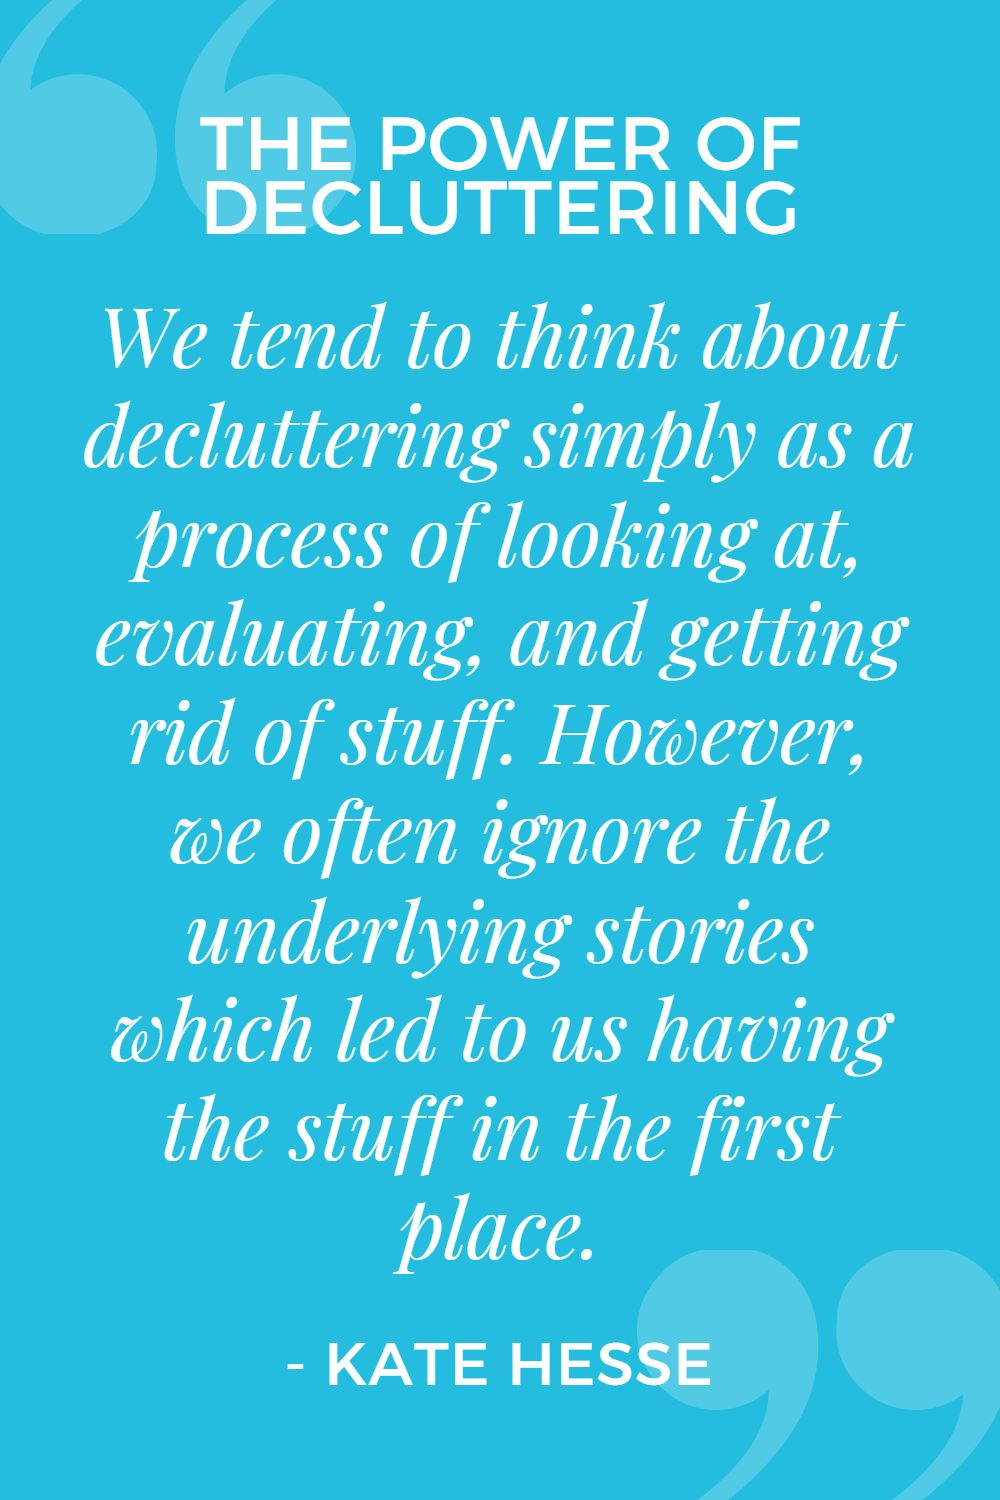 We tend to think about decluttering simply as a process of looking at, evaluating, and getting rid of stuff. However, we often ignore the underlying stories which led to us having the stuff in the first place.